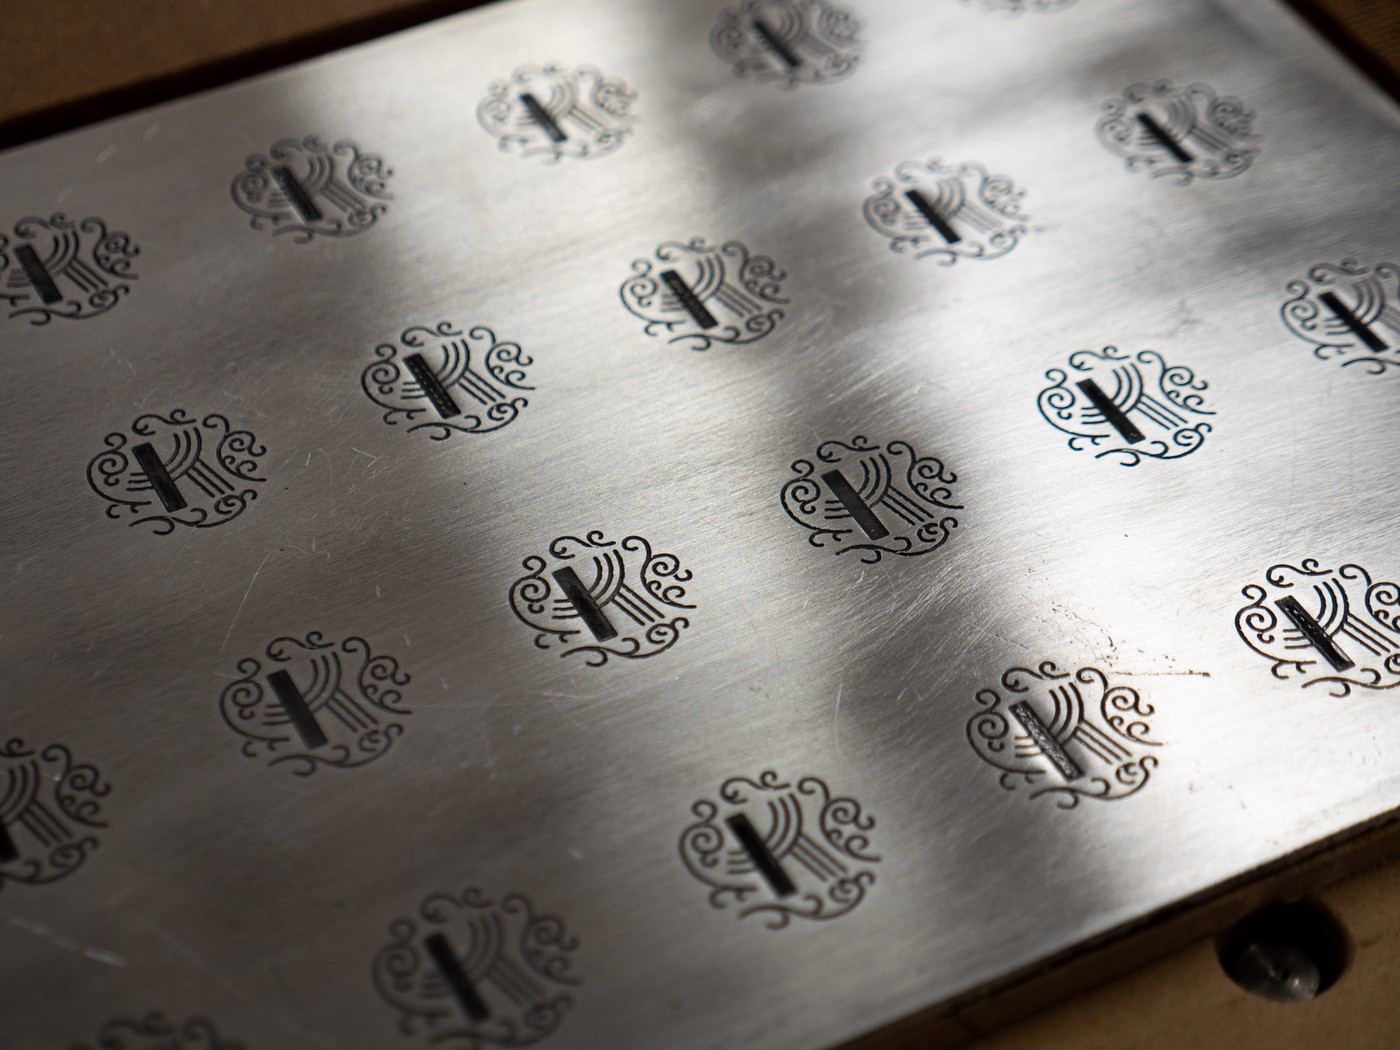 a grid of the enamel-filled engravings on a shiny aluminum plate